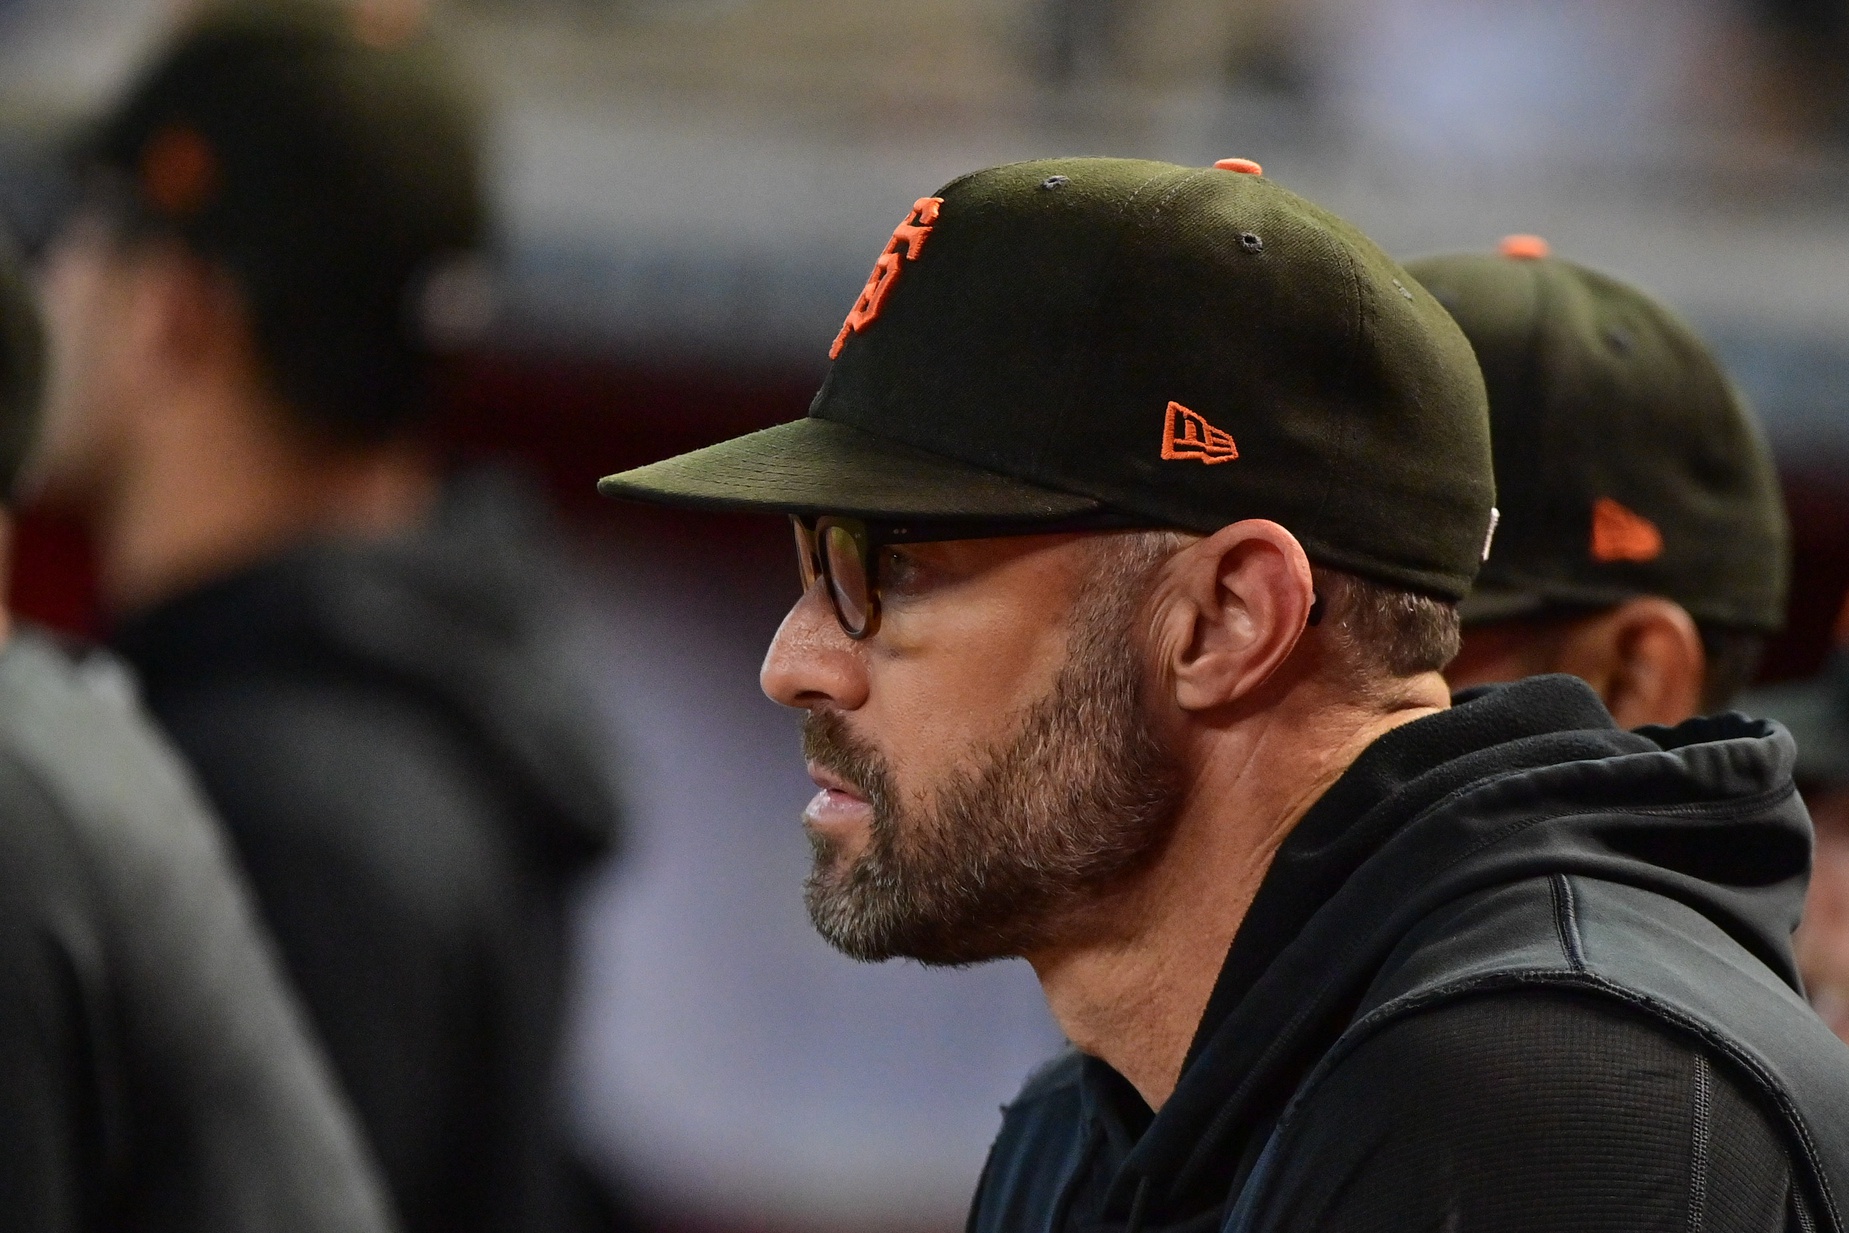 The San Francisco Giants have formally interviewed assistant coach